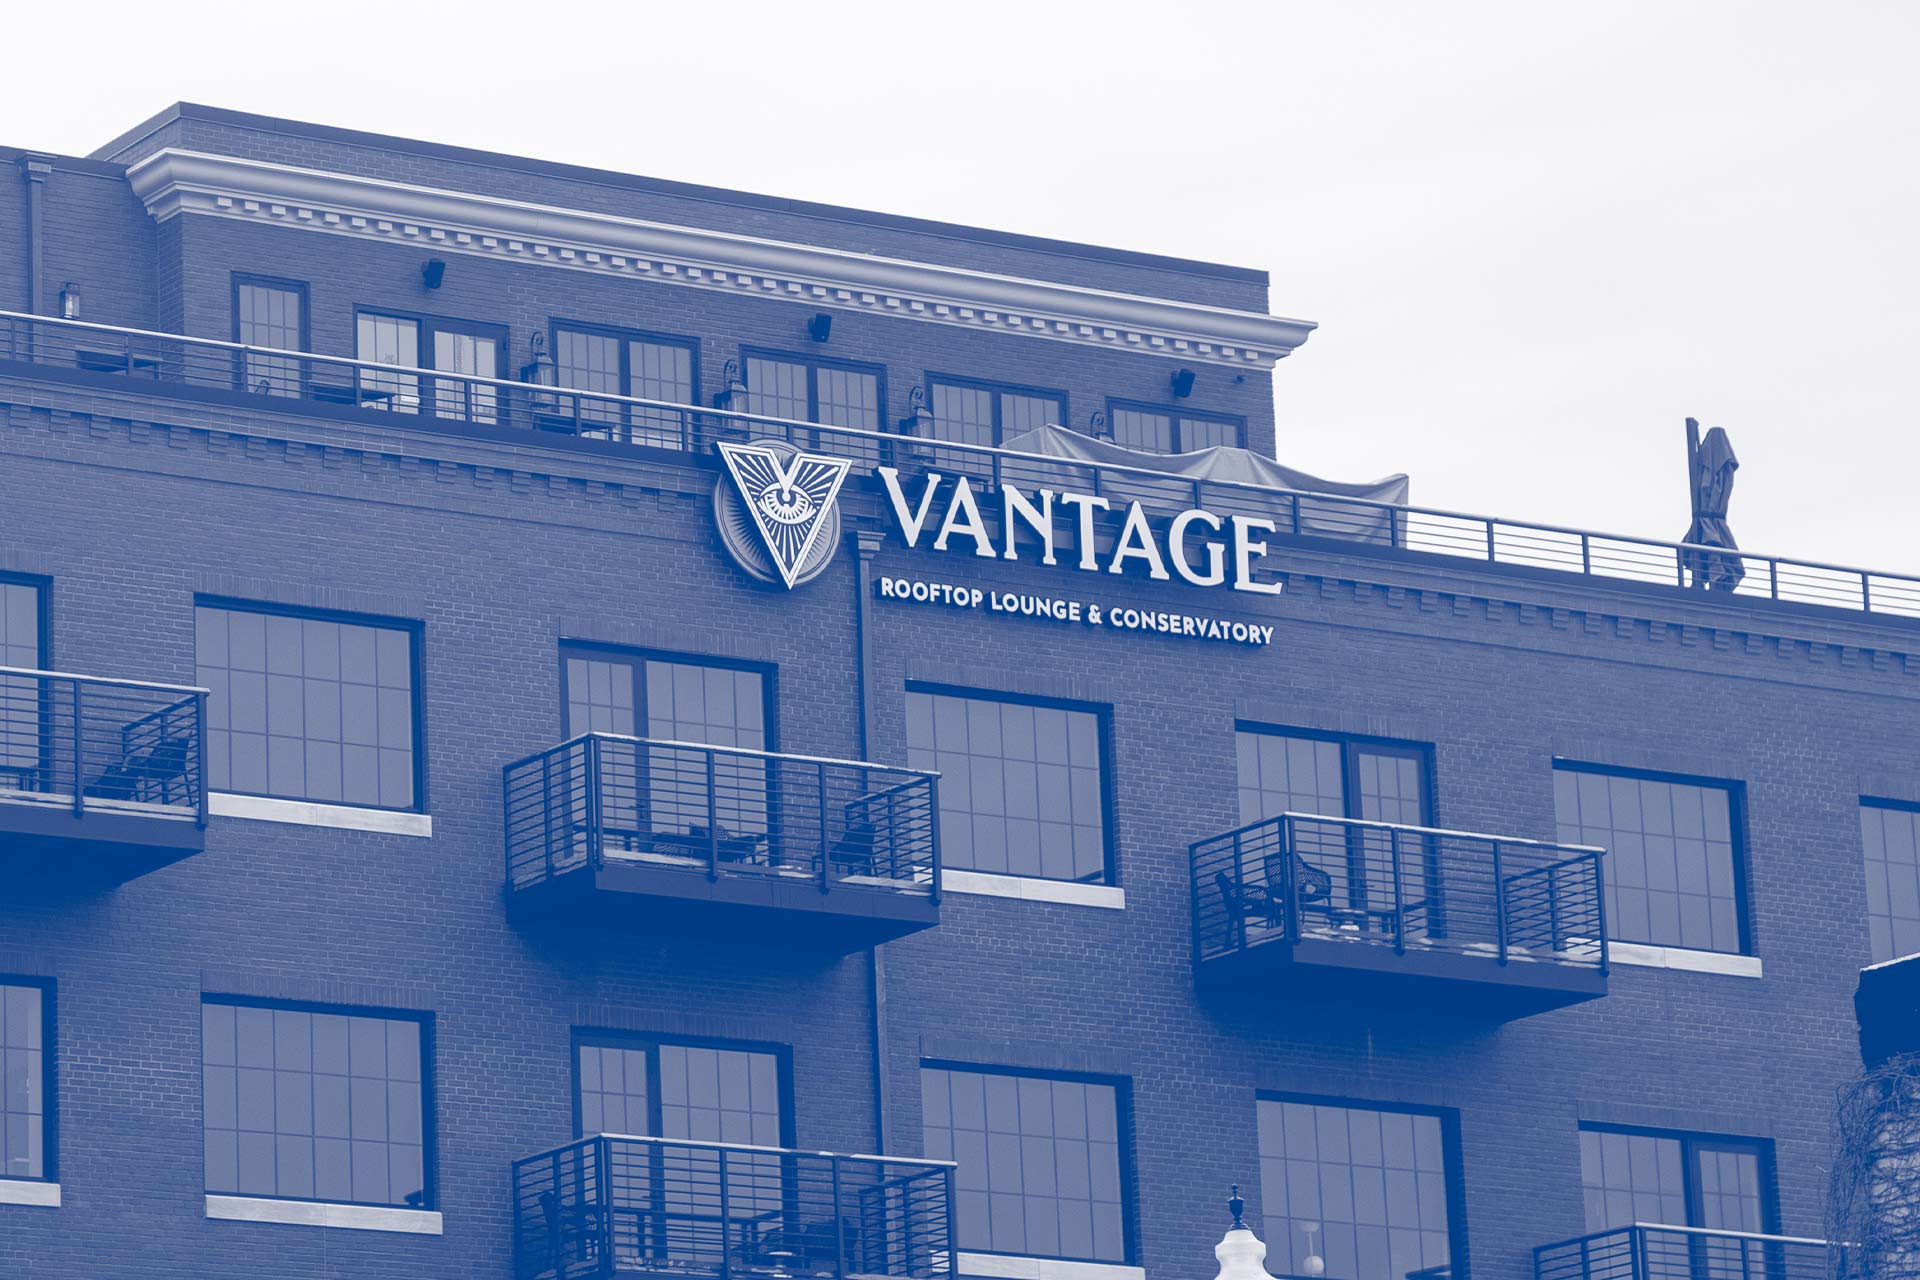 Vantage rooftop lounge and conservatory blue duotone